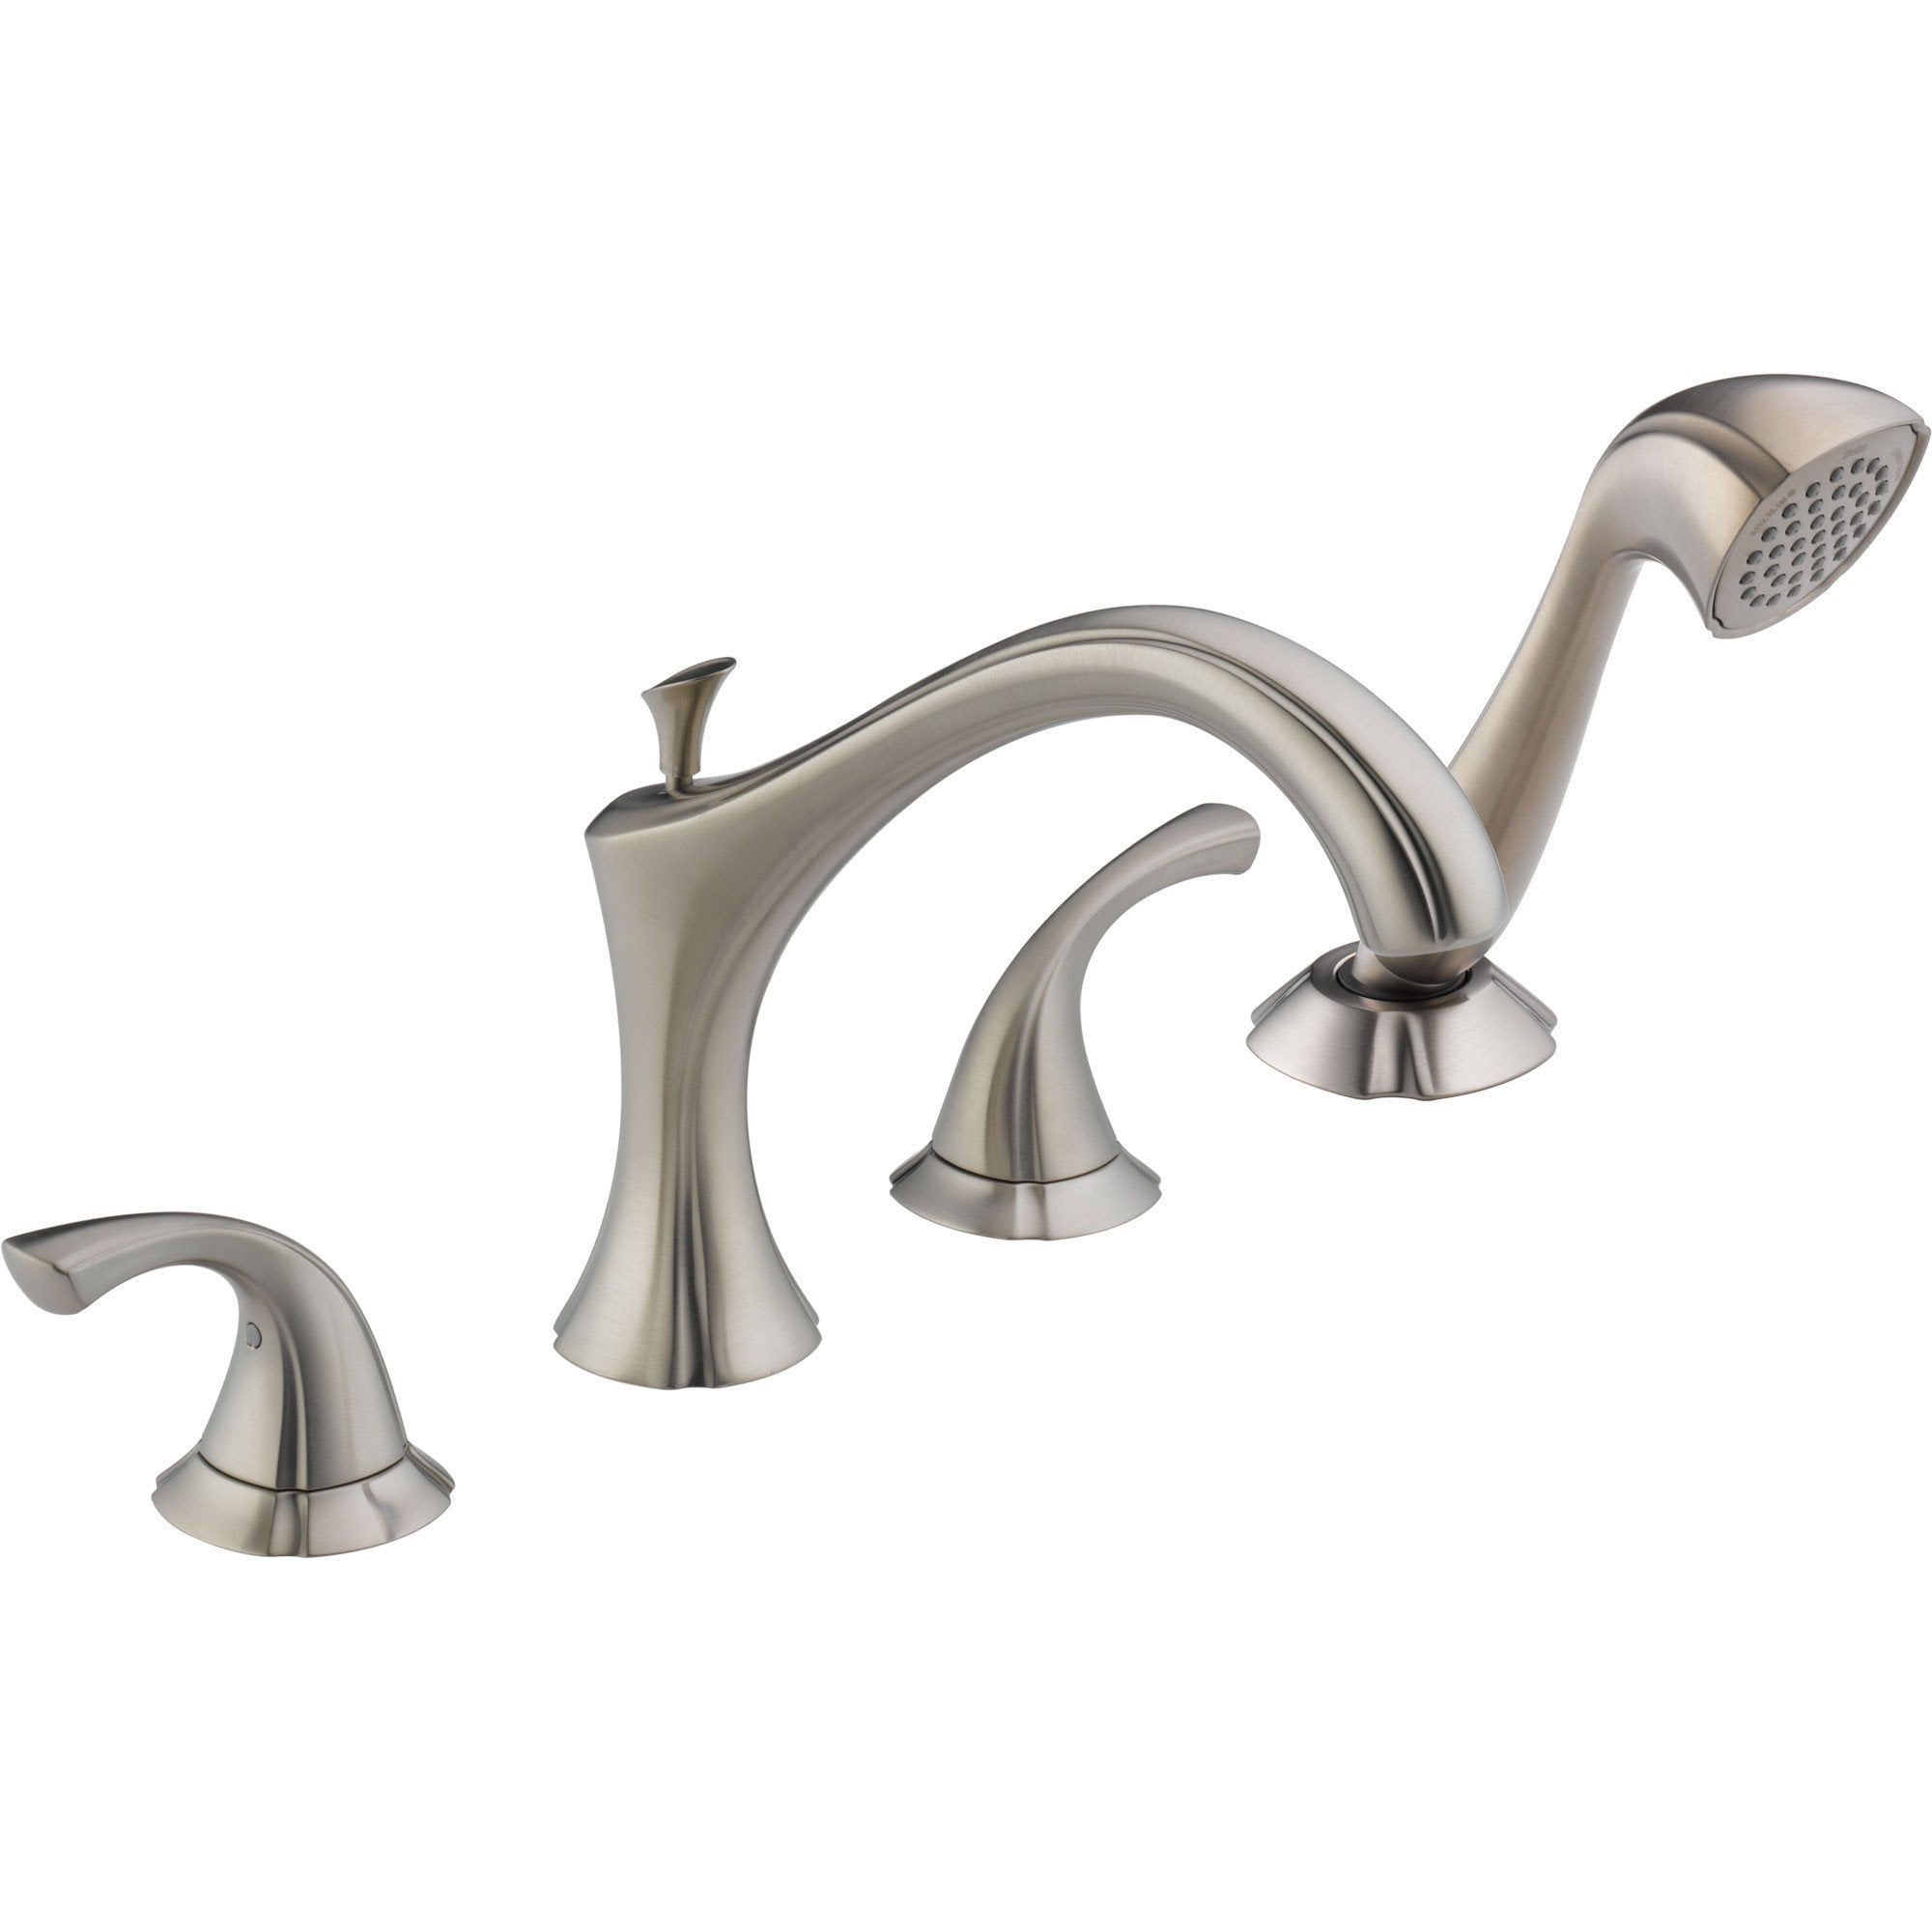 Delta Addison Stainless Steel Finish Roman Tub Faucet with Handspray Trim 476463